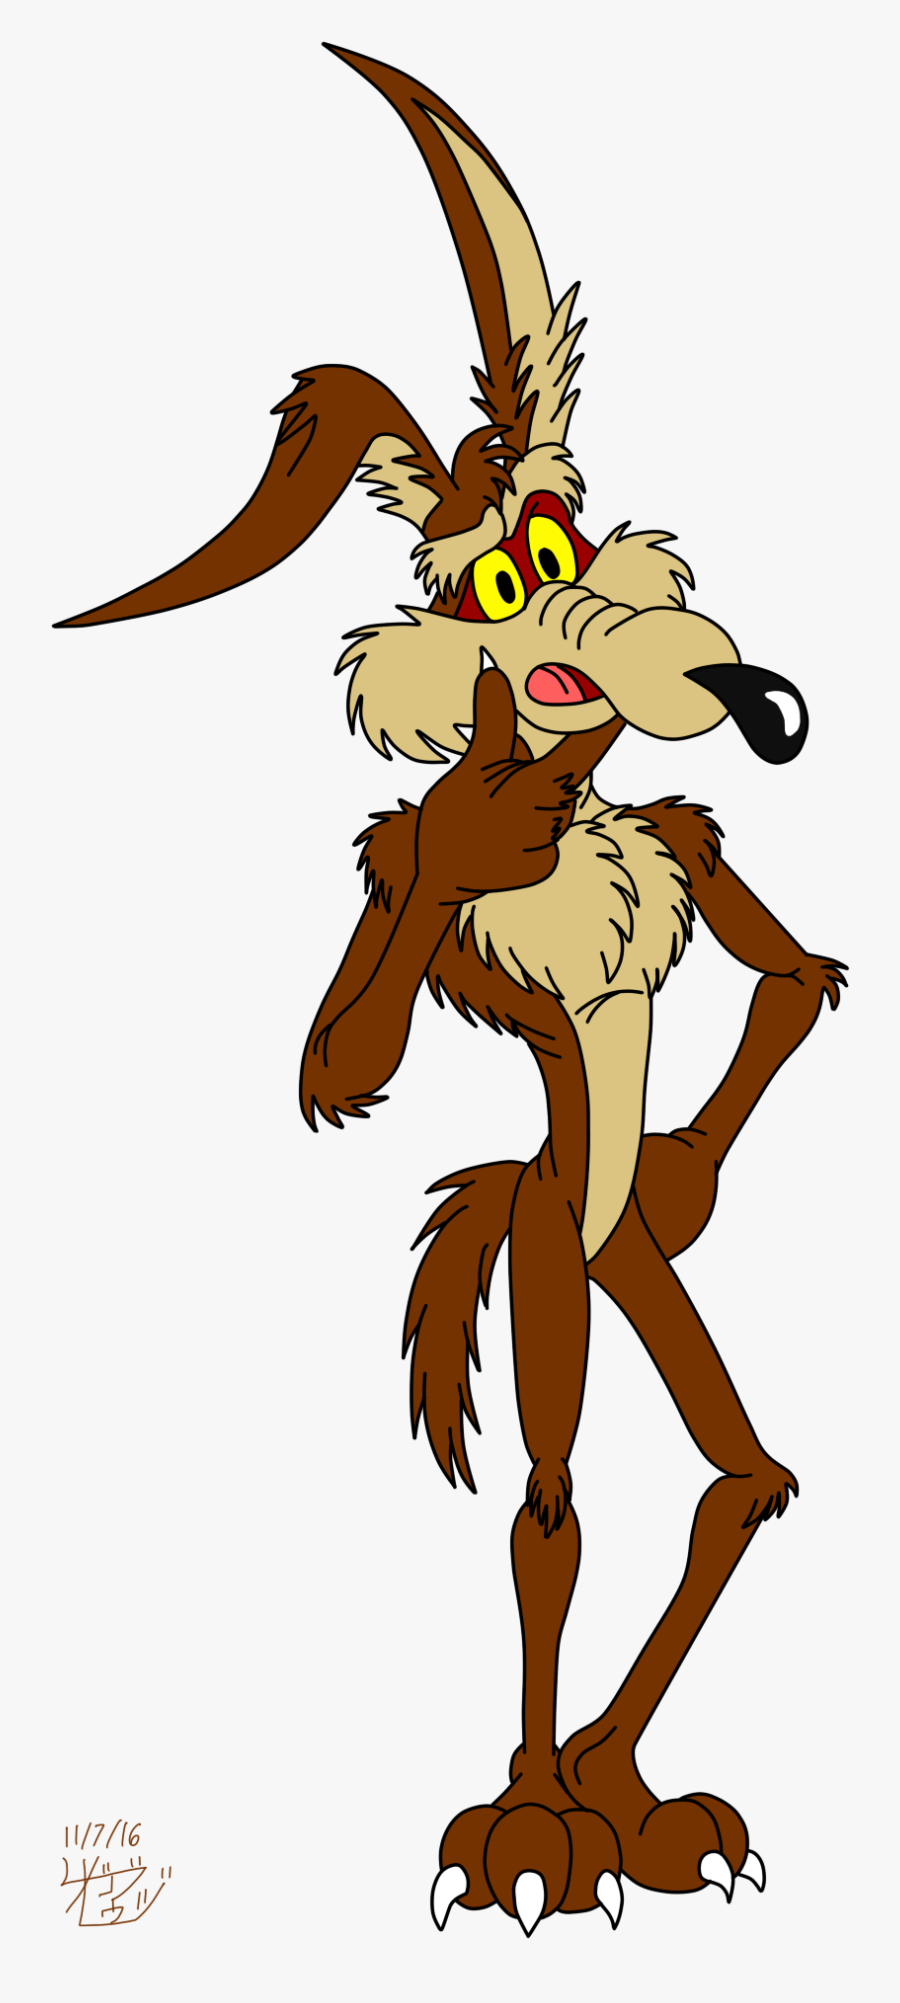 Wile E Coyote Art « Older - Cartoon , Free Transparent Clipart - ClipartKey